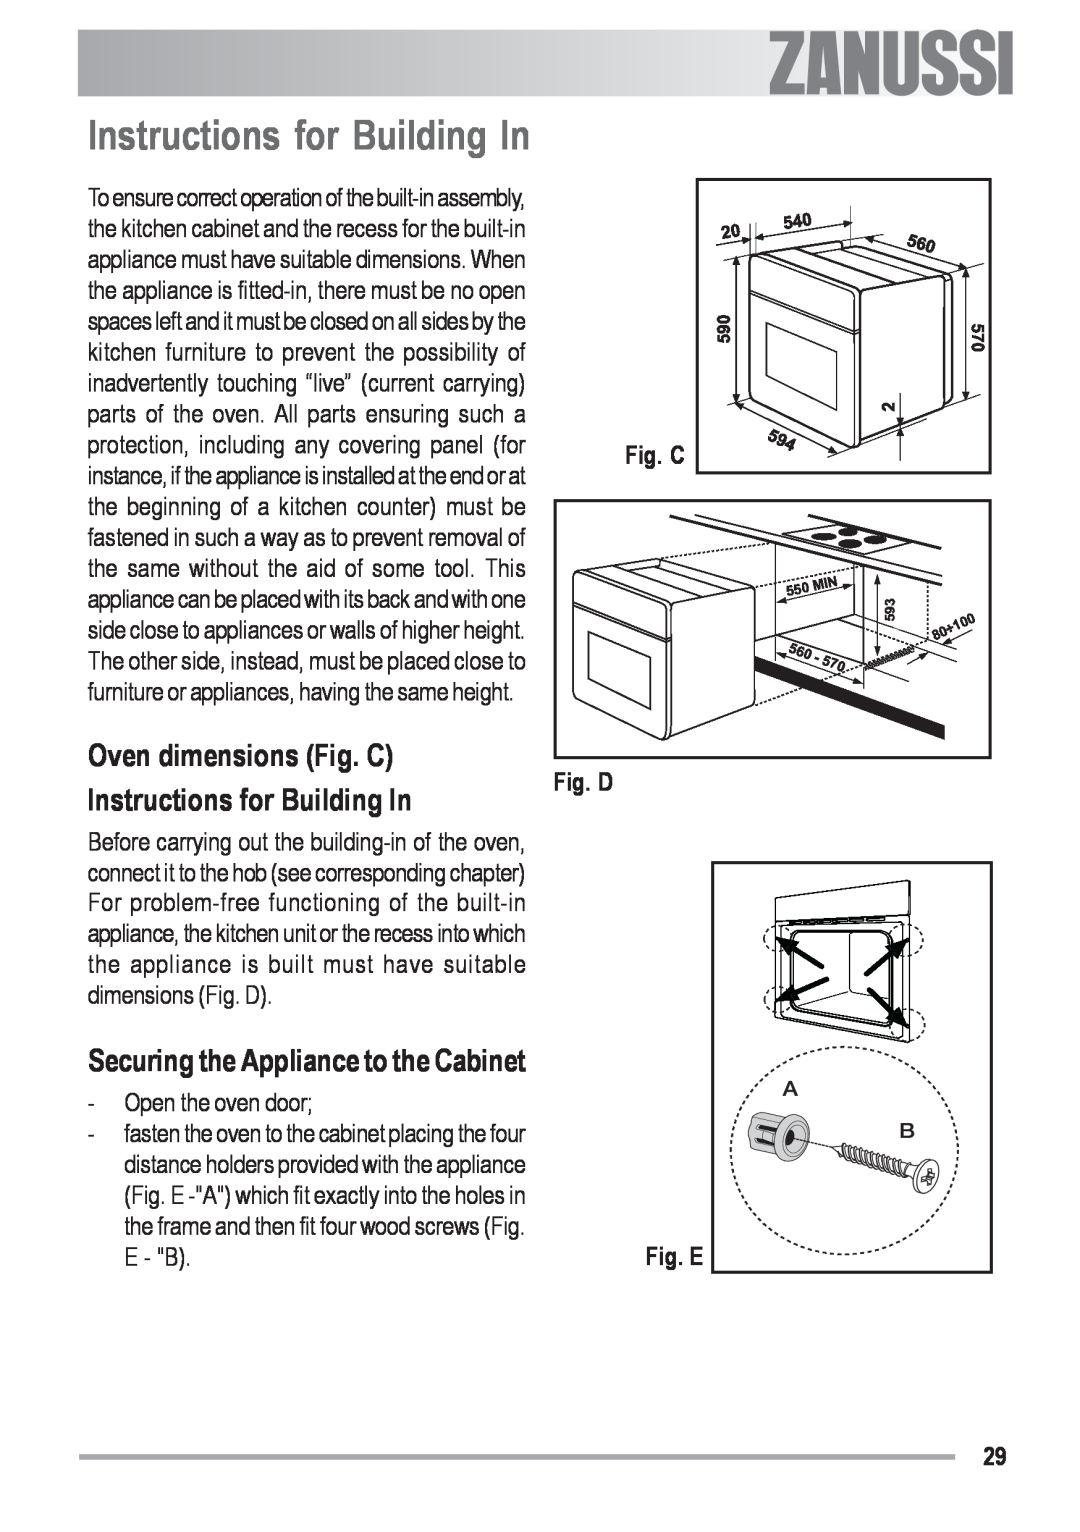 Zanussi ZOU 481 Oven dimensions Fig. C Instructions for Building In, Securing the Appliance to the Cabinet, Fig. D 